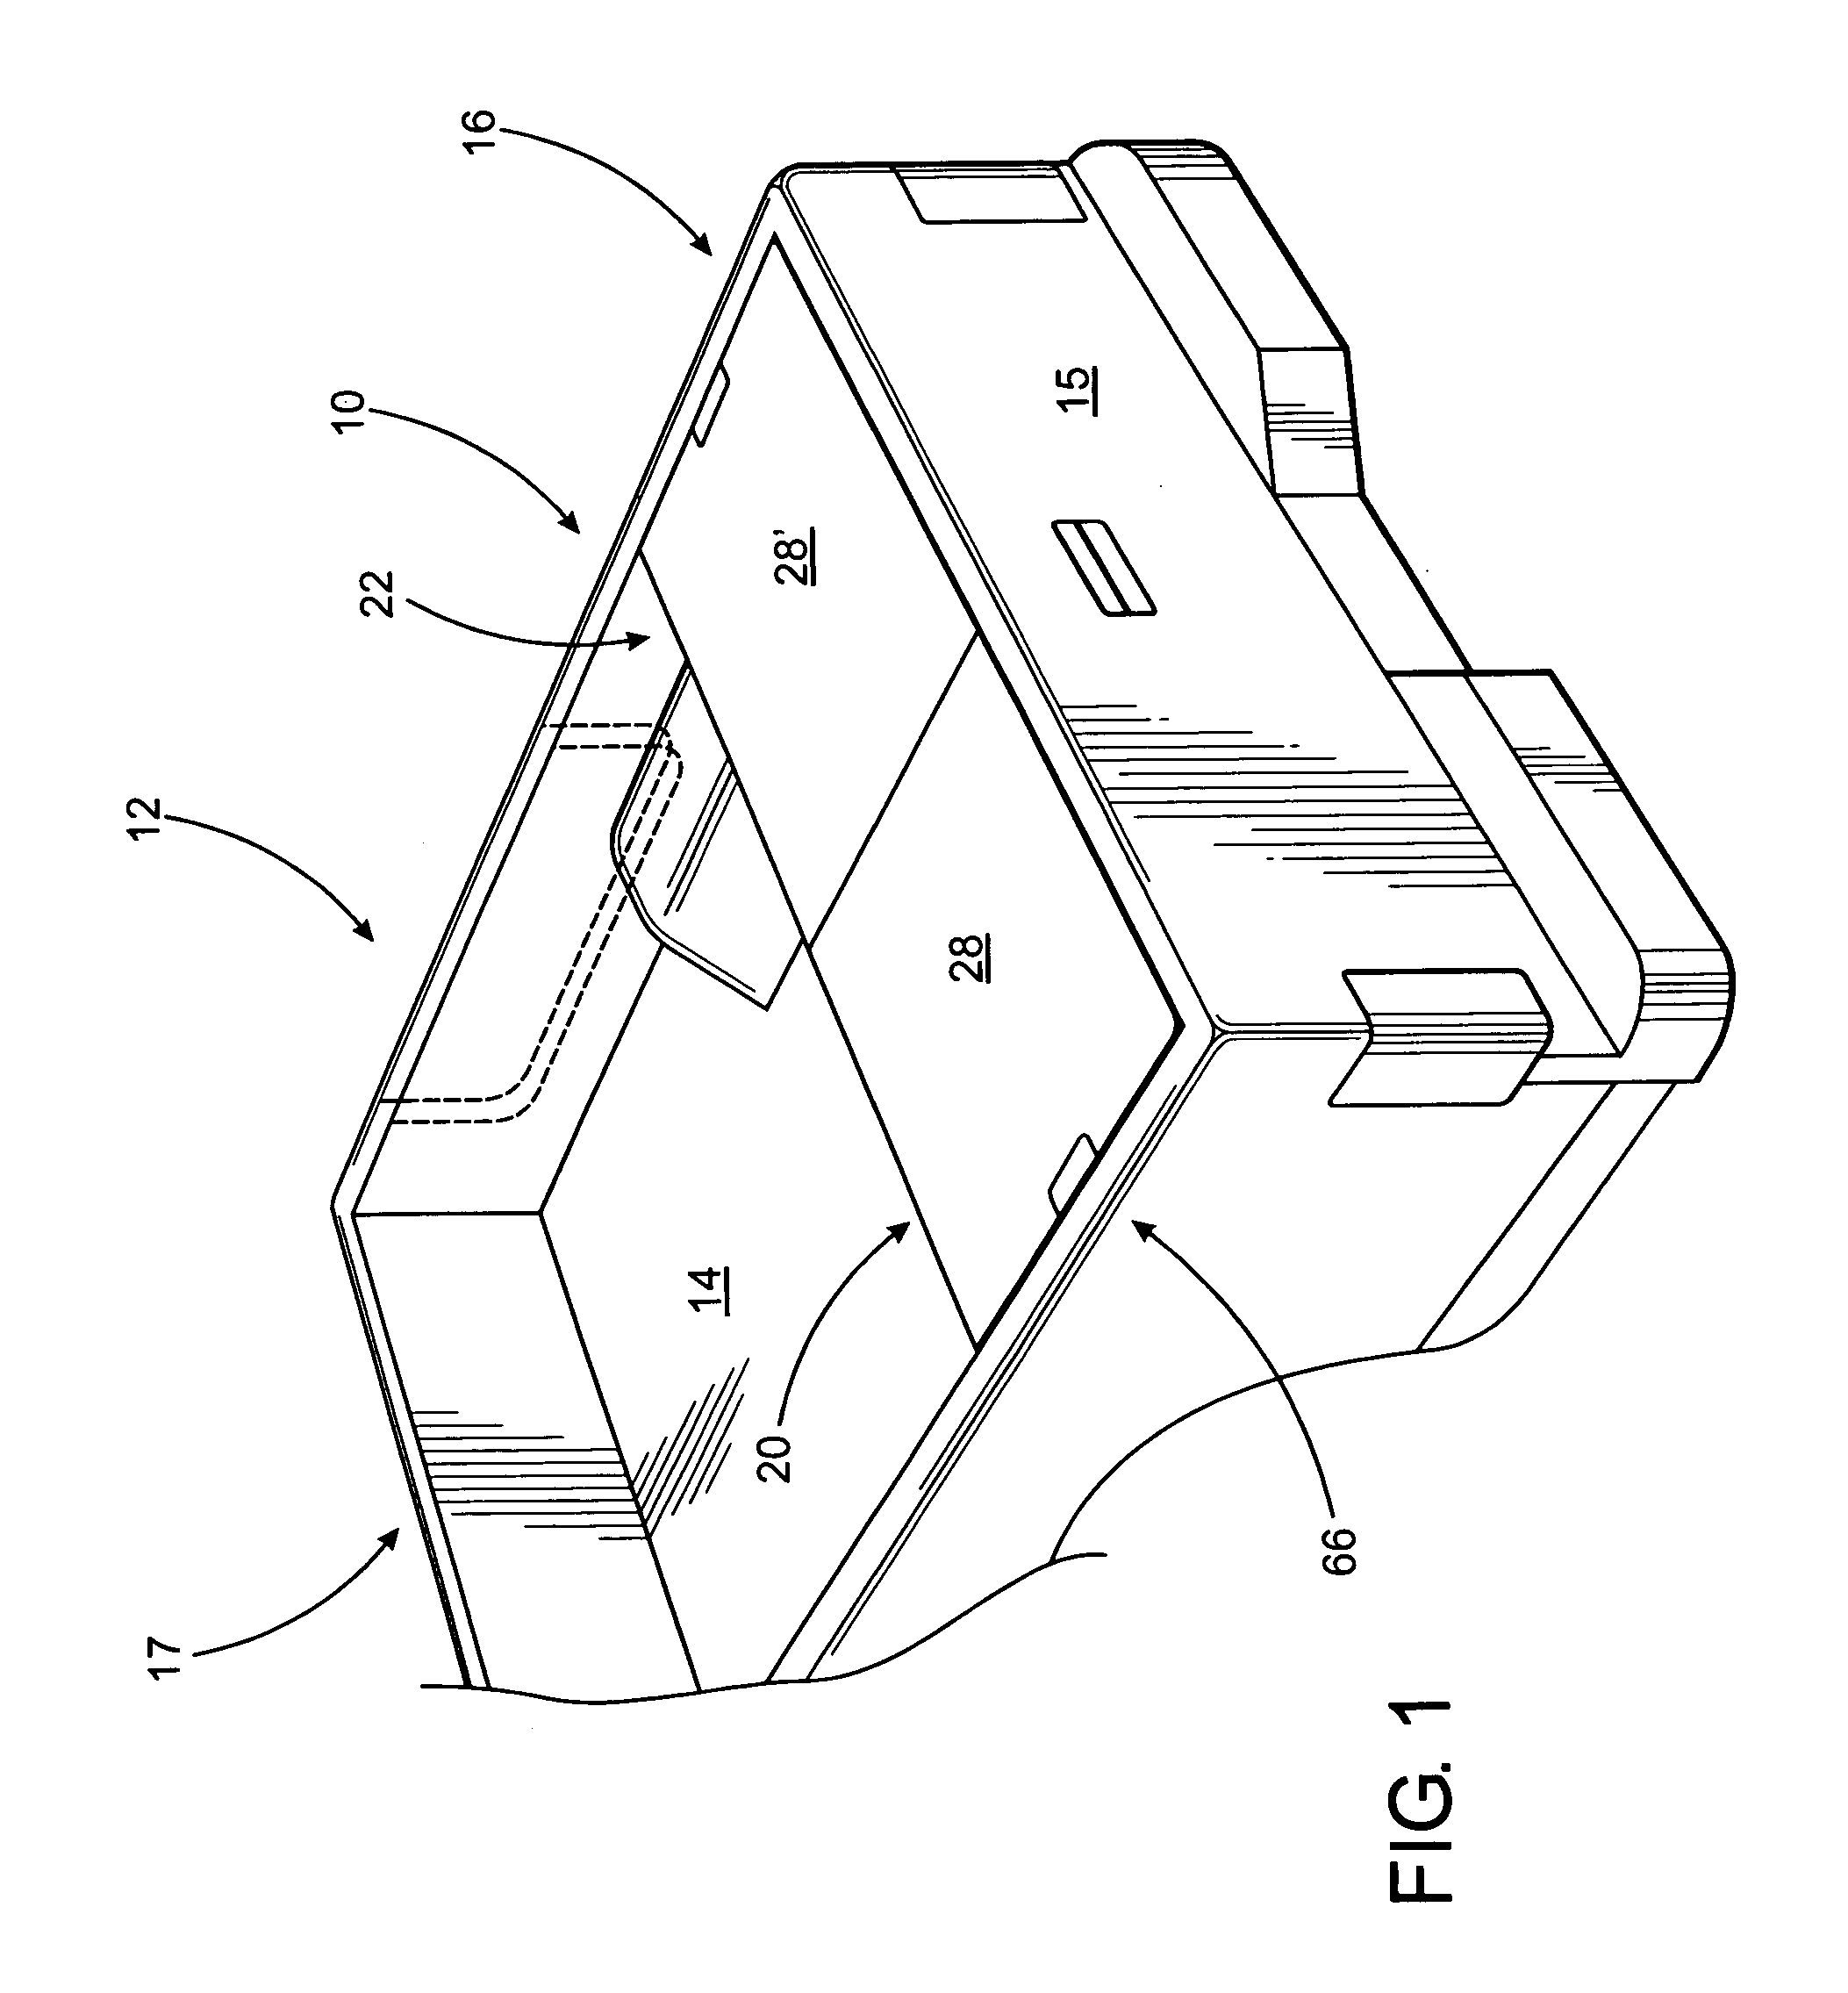 Airflow deflector assembly